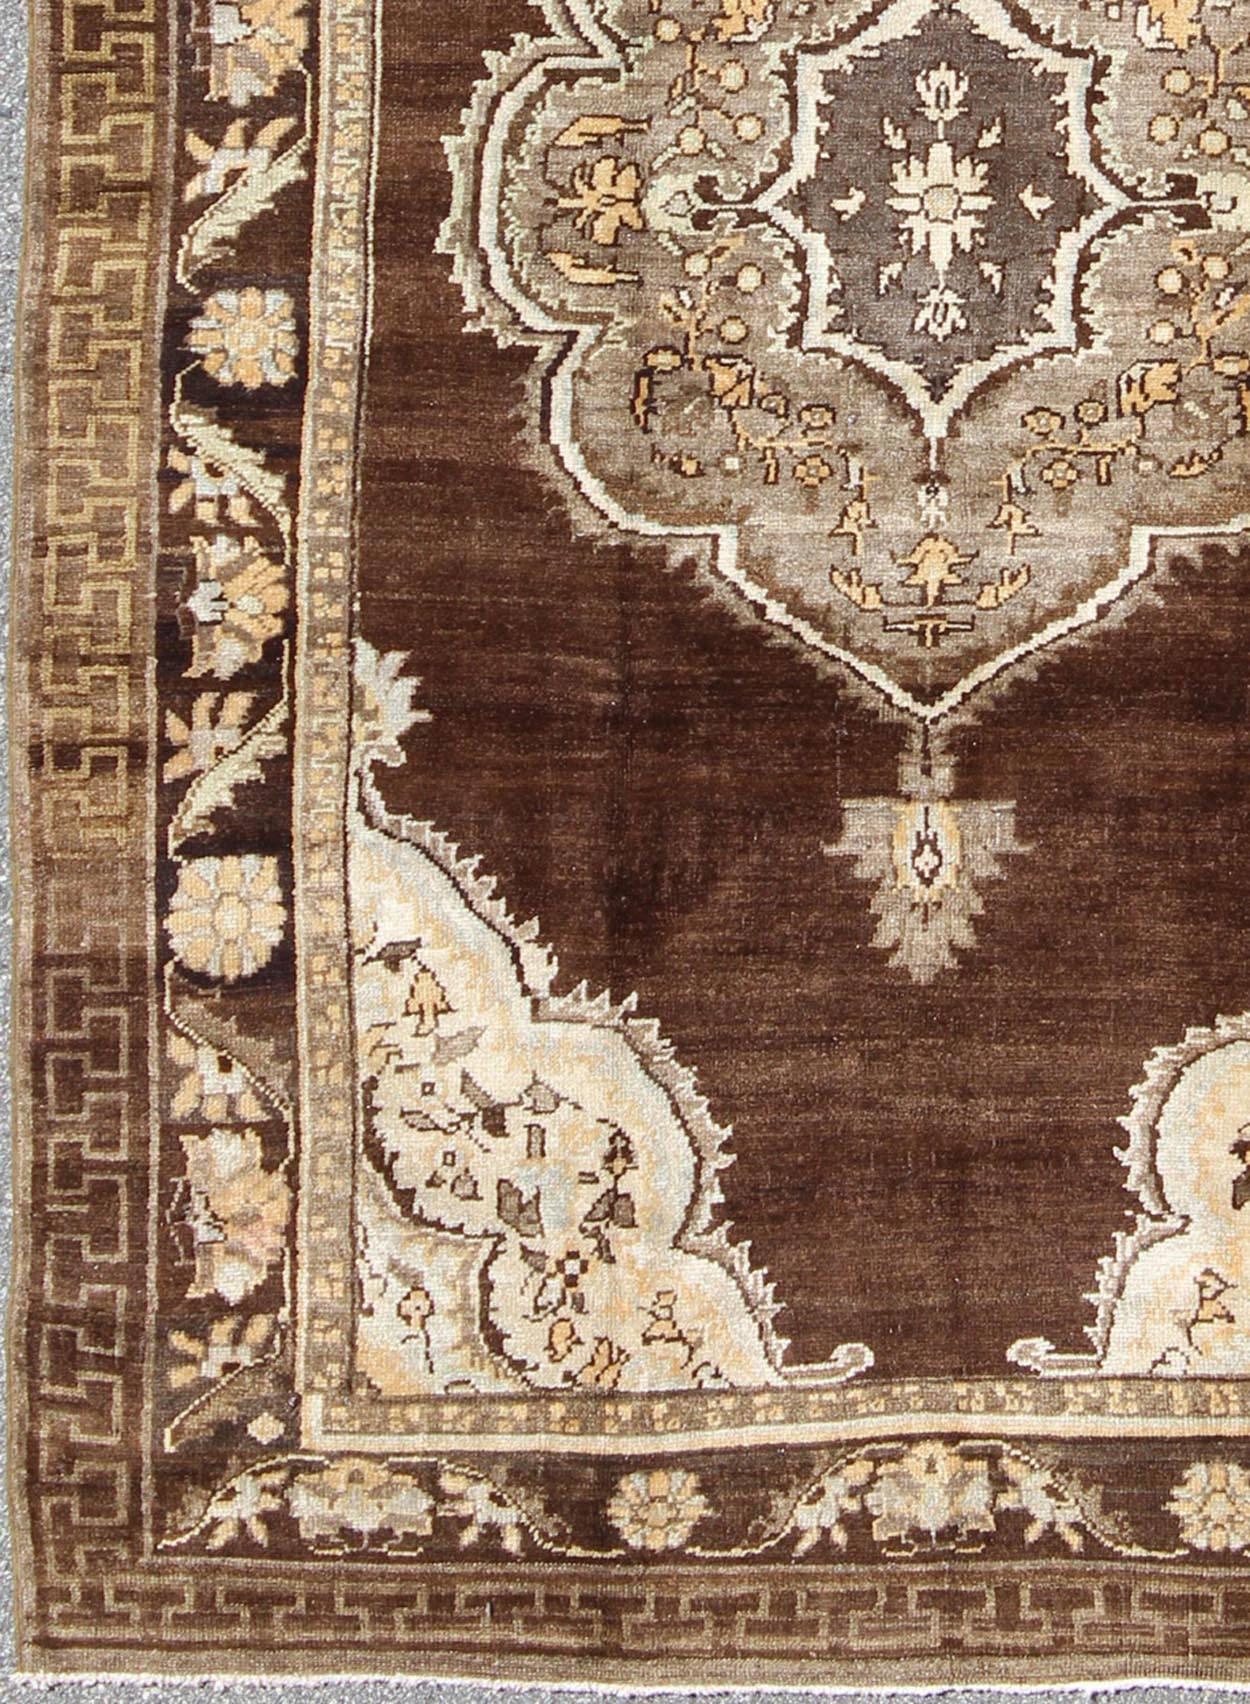 This vintage Turkish Oushak rug, (circa mid-20th century) features a unique blend of colors and an intricately beautiful design. The ornate central medallion is complemented by a symmetrical set of floral motifs in the surrounding cornices and